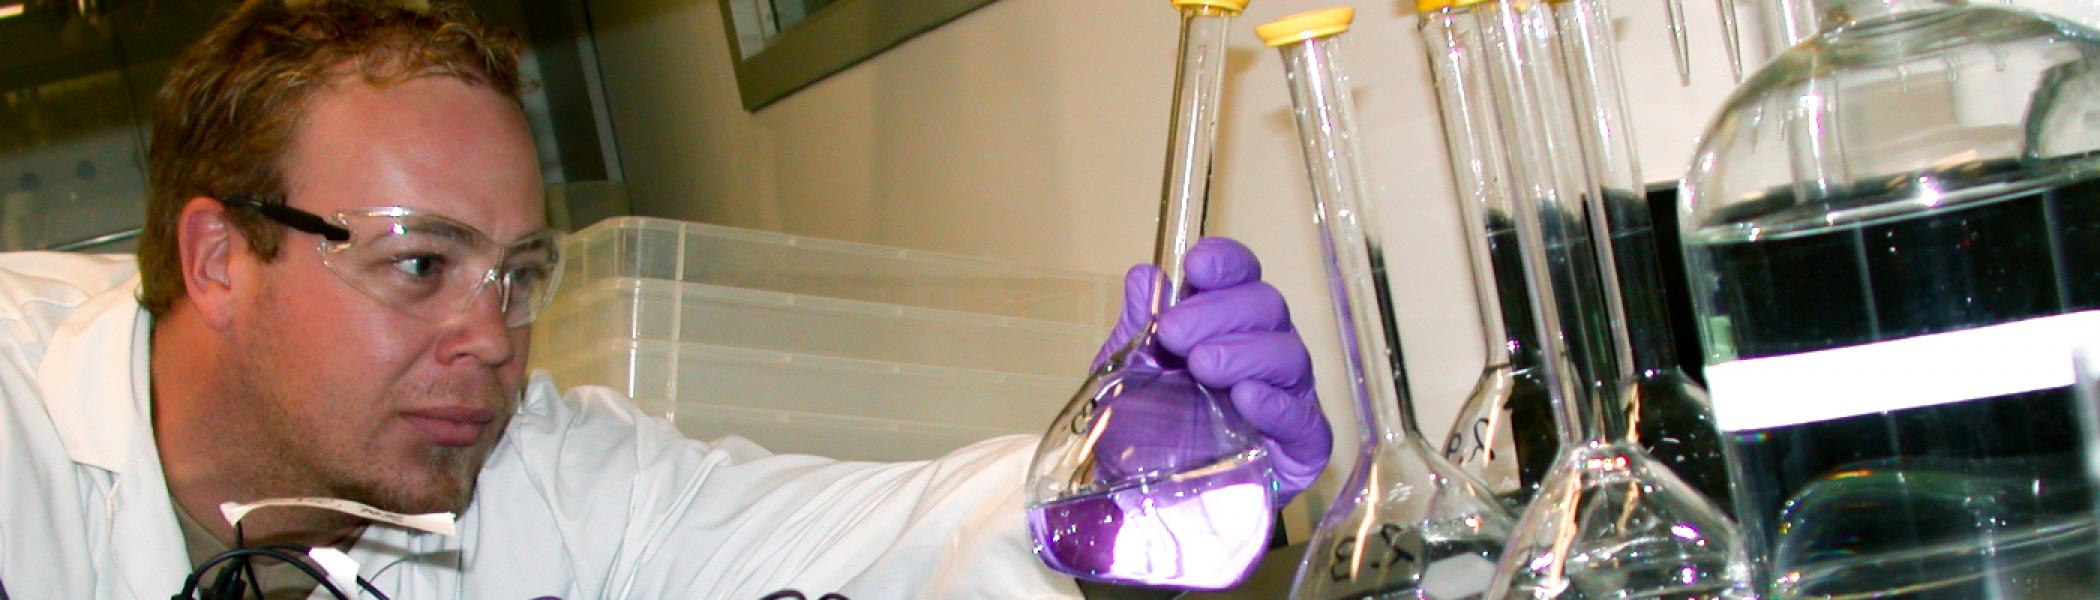 close up of male student wearing safety glasses, lab coat and gloves holding a flask and looking at it closely